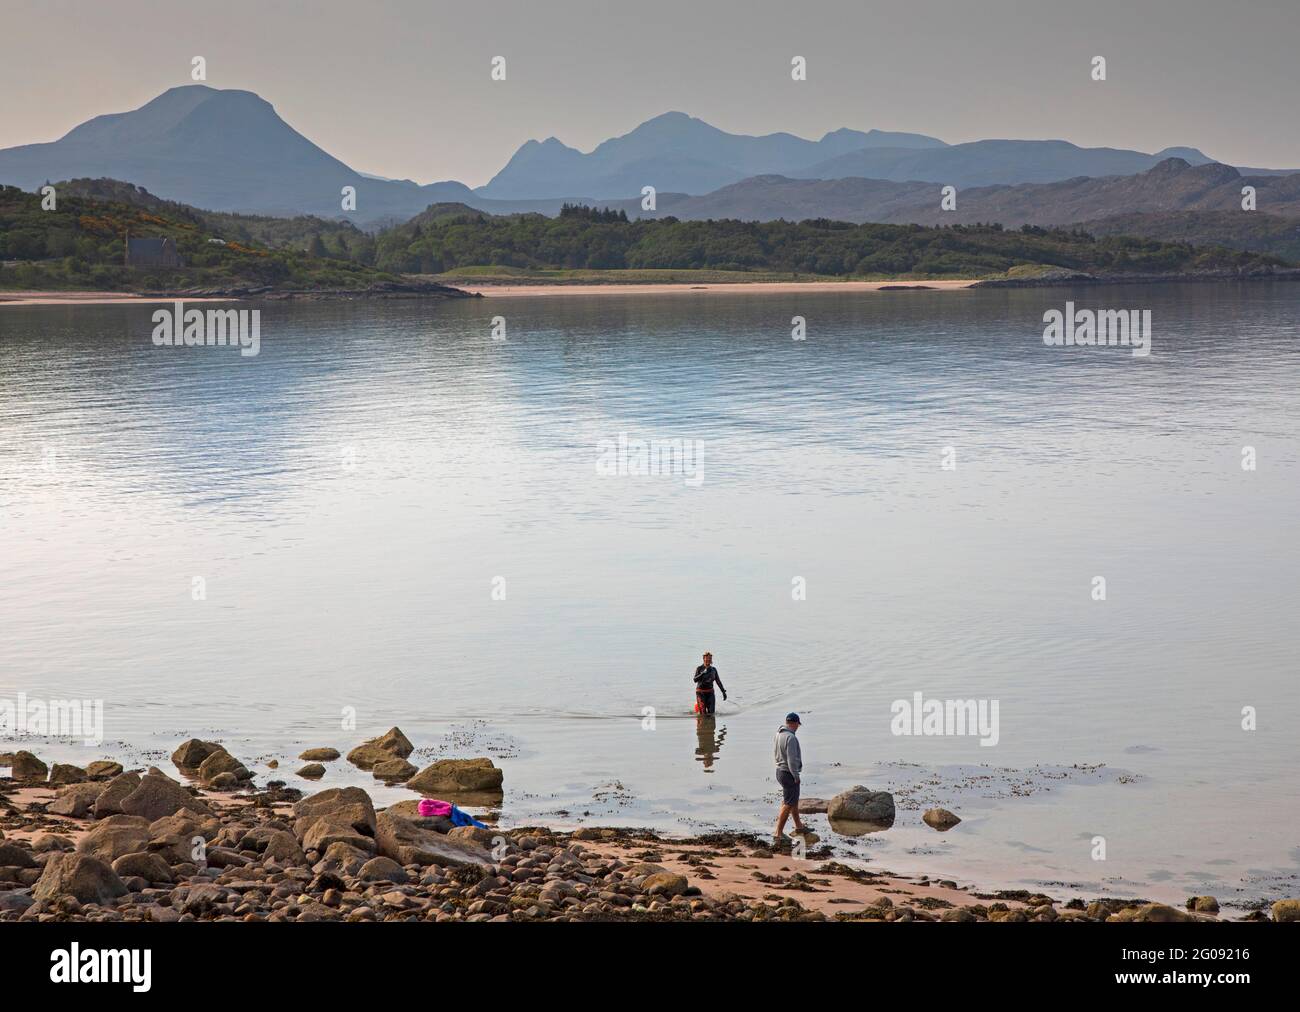 Strath By, Loch Gairloch, Wester Ross, Scotland, UK weather, 2nd June 2021. Hazy sunshine in morning, temprature  of 12 degrees centigrade with 21 degrees expected later, currently almost midge free.. Pictured: Female Cold water swimmer in wet suit leaving the loch walking towards her partner after a cool dip, with the Torridon mountains in the background. Credit: Arch White/Alamy Live News. Stock Photo